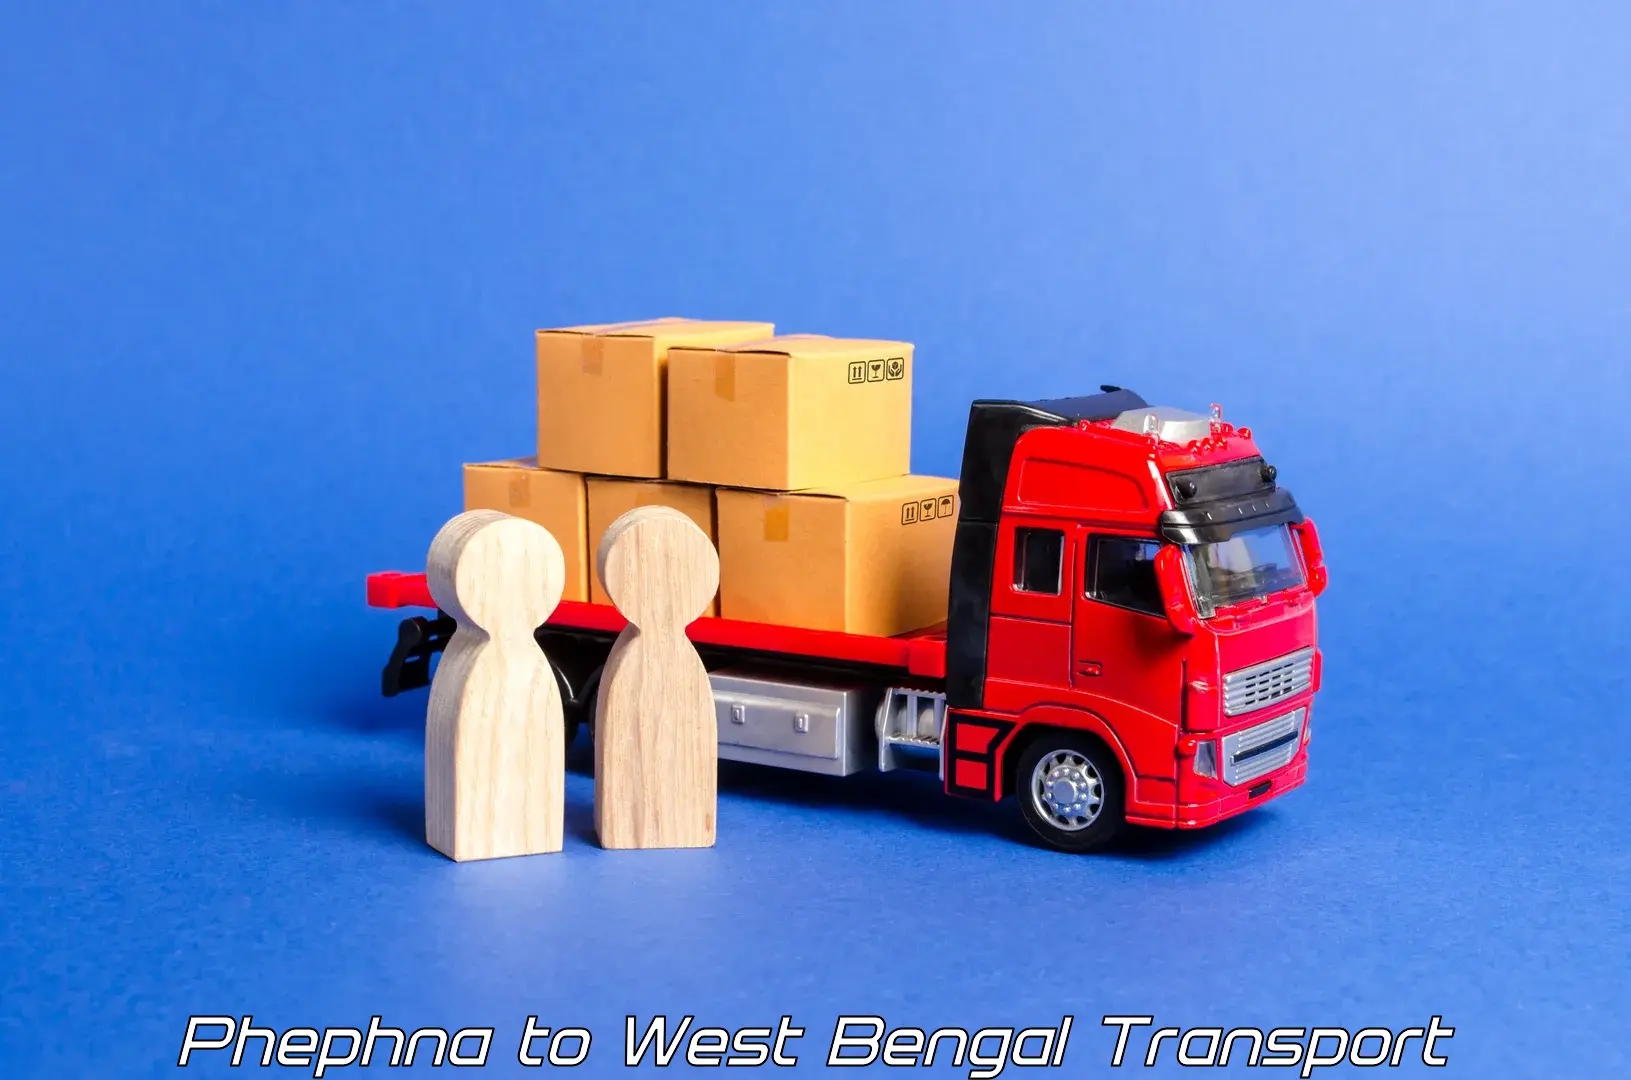 Air freight transport services Phephna to West Bengal